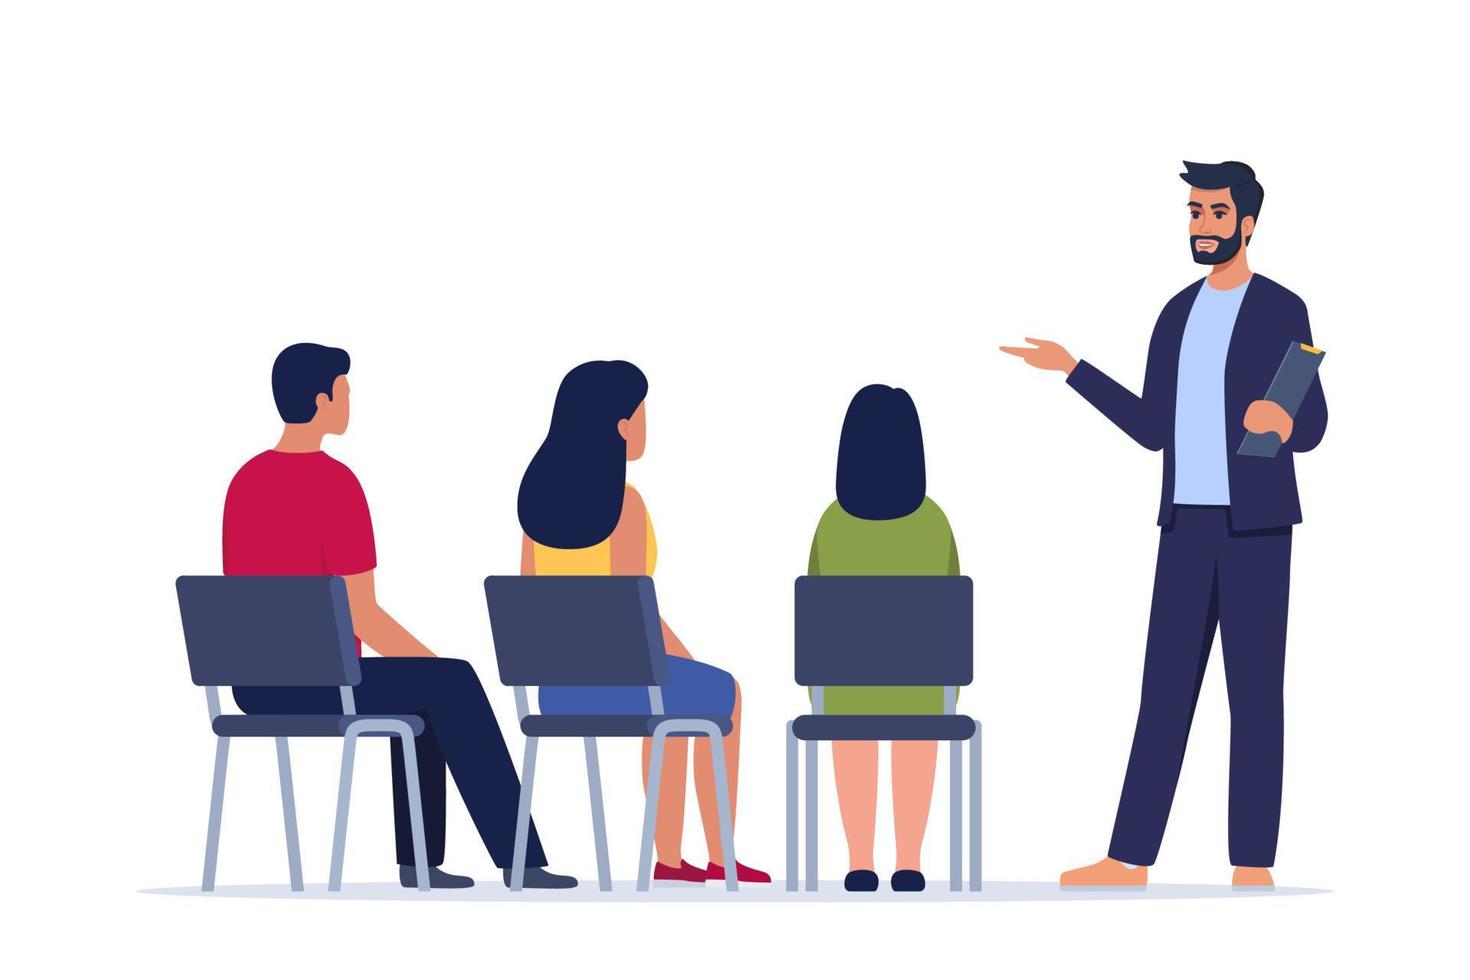 Man trains newcomers to company. HR manager explains tasks, sets goals for interns. Staff management concept. Personnel training. Onboarding, orientation training on first day. Vector illustration.